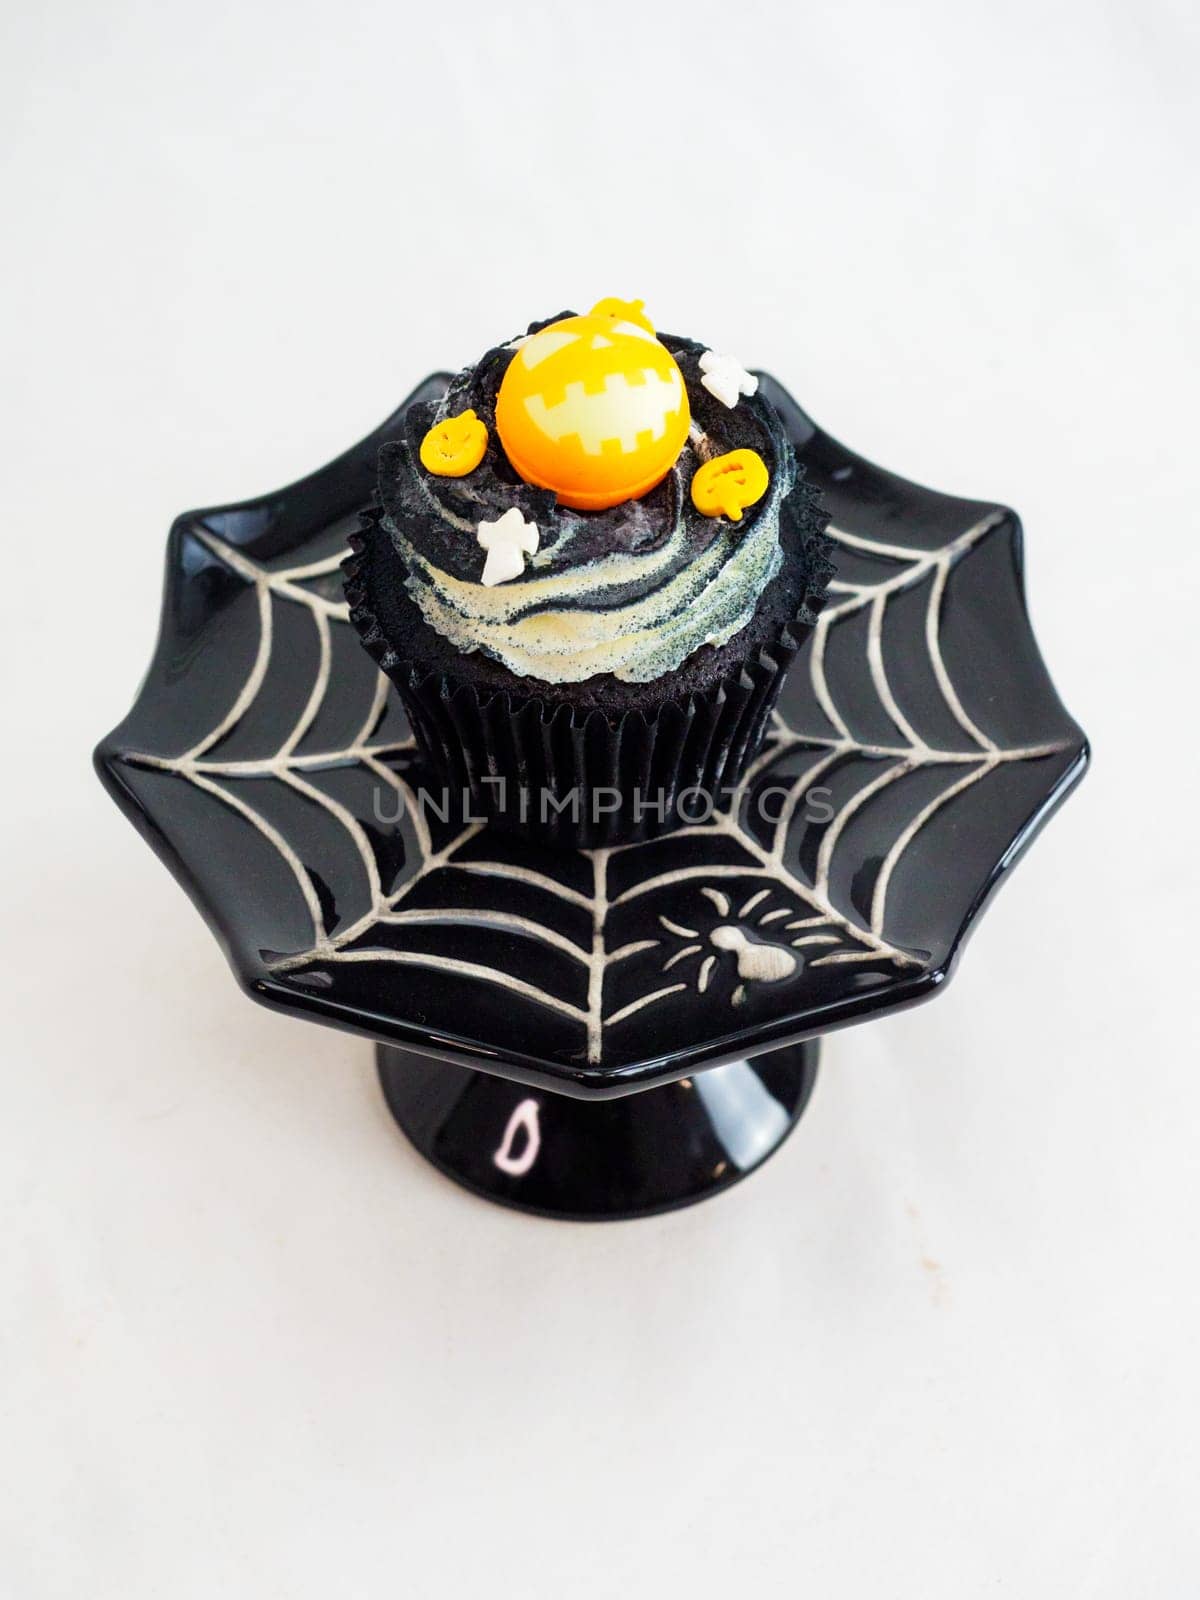 halloween horror themed caupacke muffin on white background by verbano